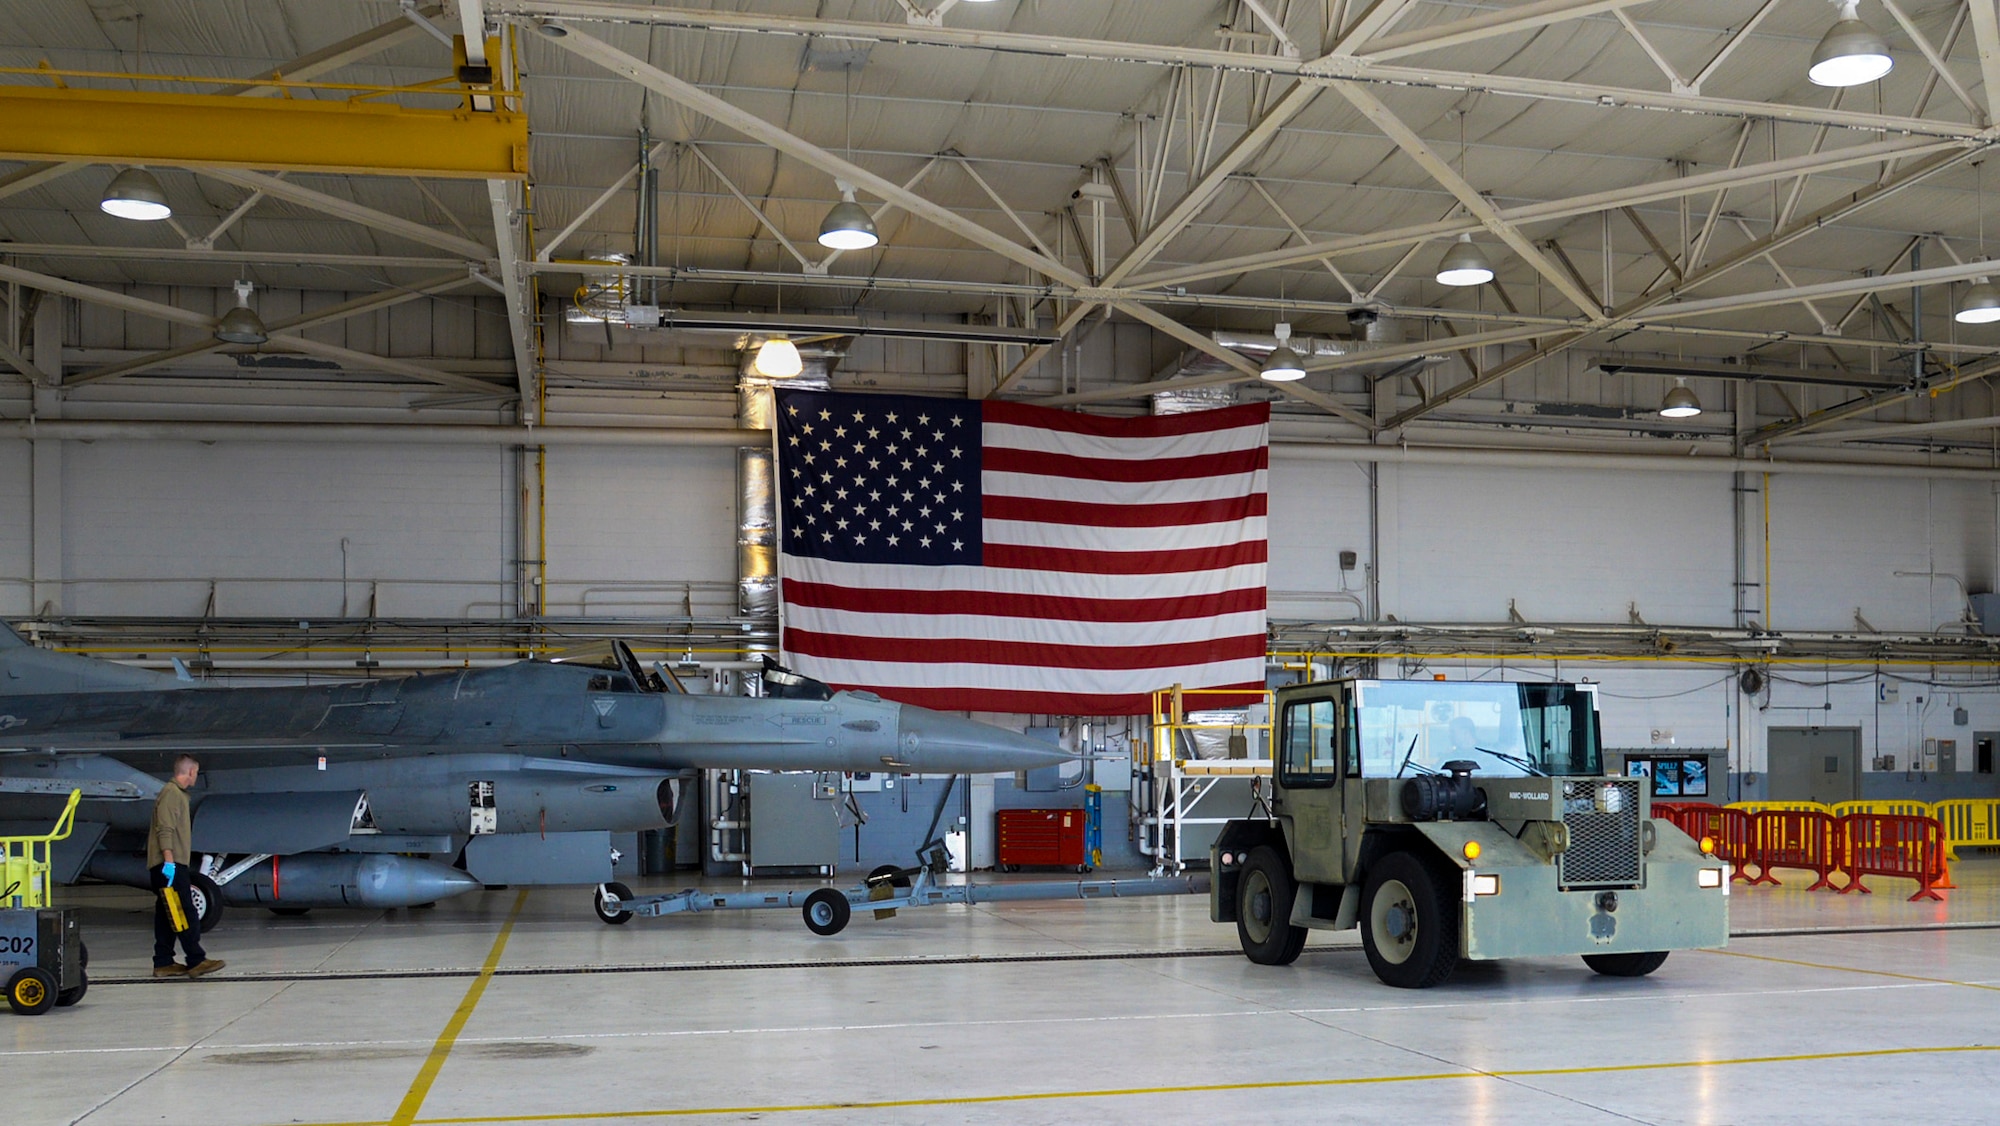 An image of a U.S. Air Force F-16C Fighting Falcon being towed out of the main hangar at the 177th Fighter Wing of the New Jersey Air National Guard, Egg Harbor Township, New Jersey.